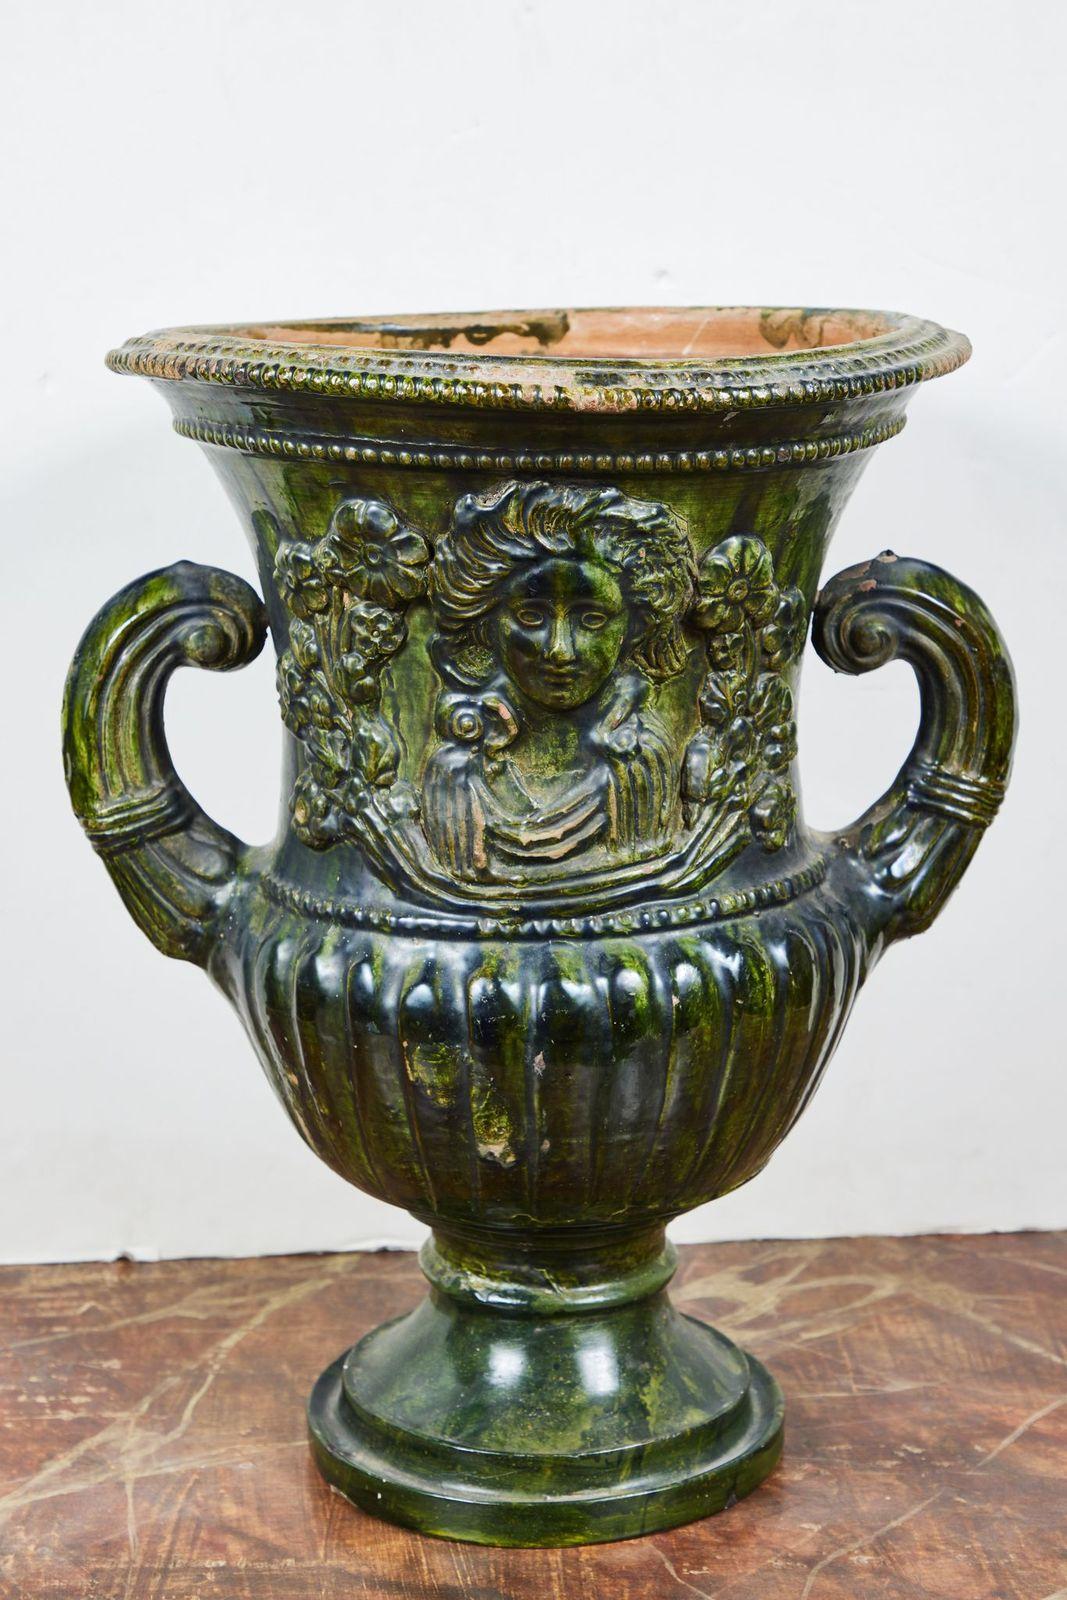 A large pair of relief molded, period, hand-sculpted terracotta urns in lush green glaze. Each piece features two, classical-style goddess-like figures in robes surrounded by foliate forms above a fluted, base tapering to a stepped foot.